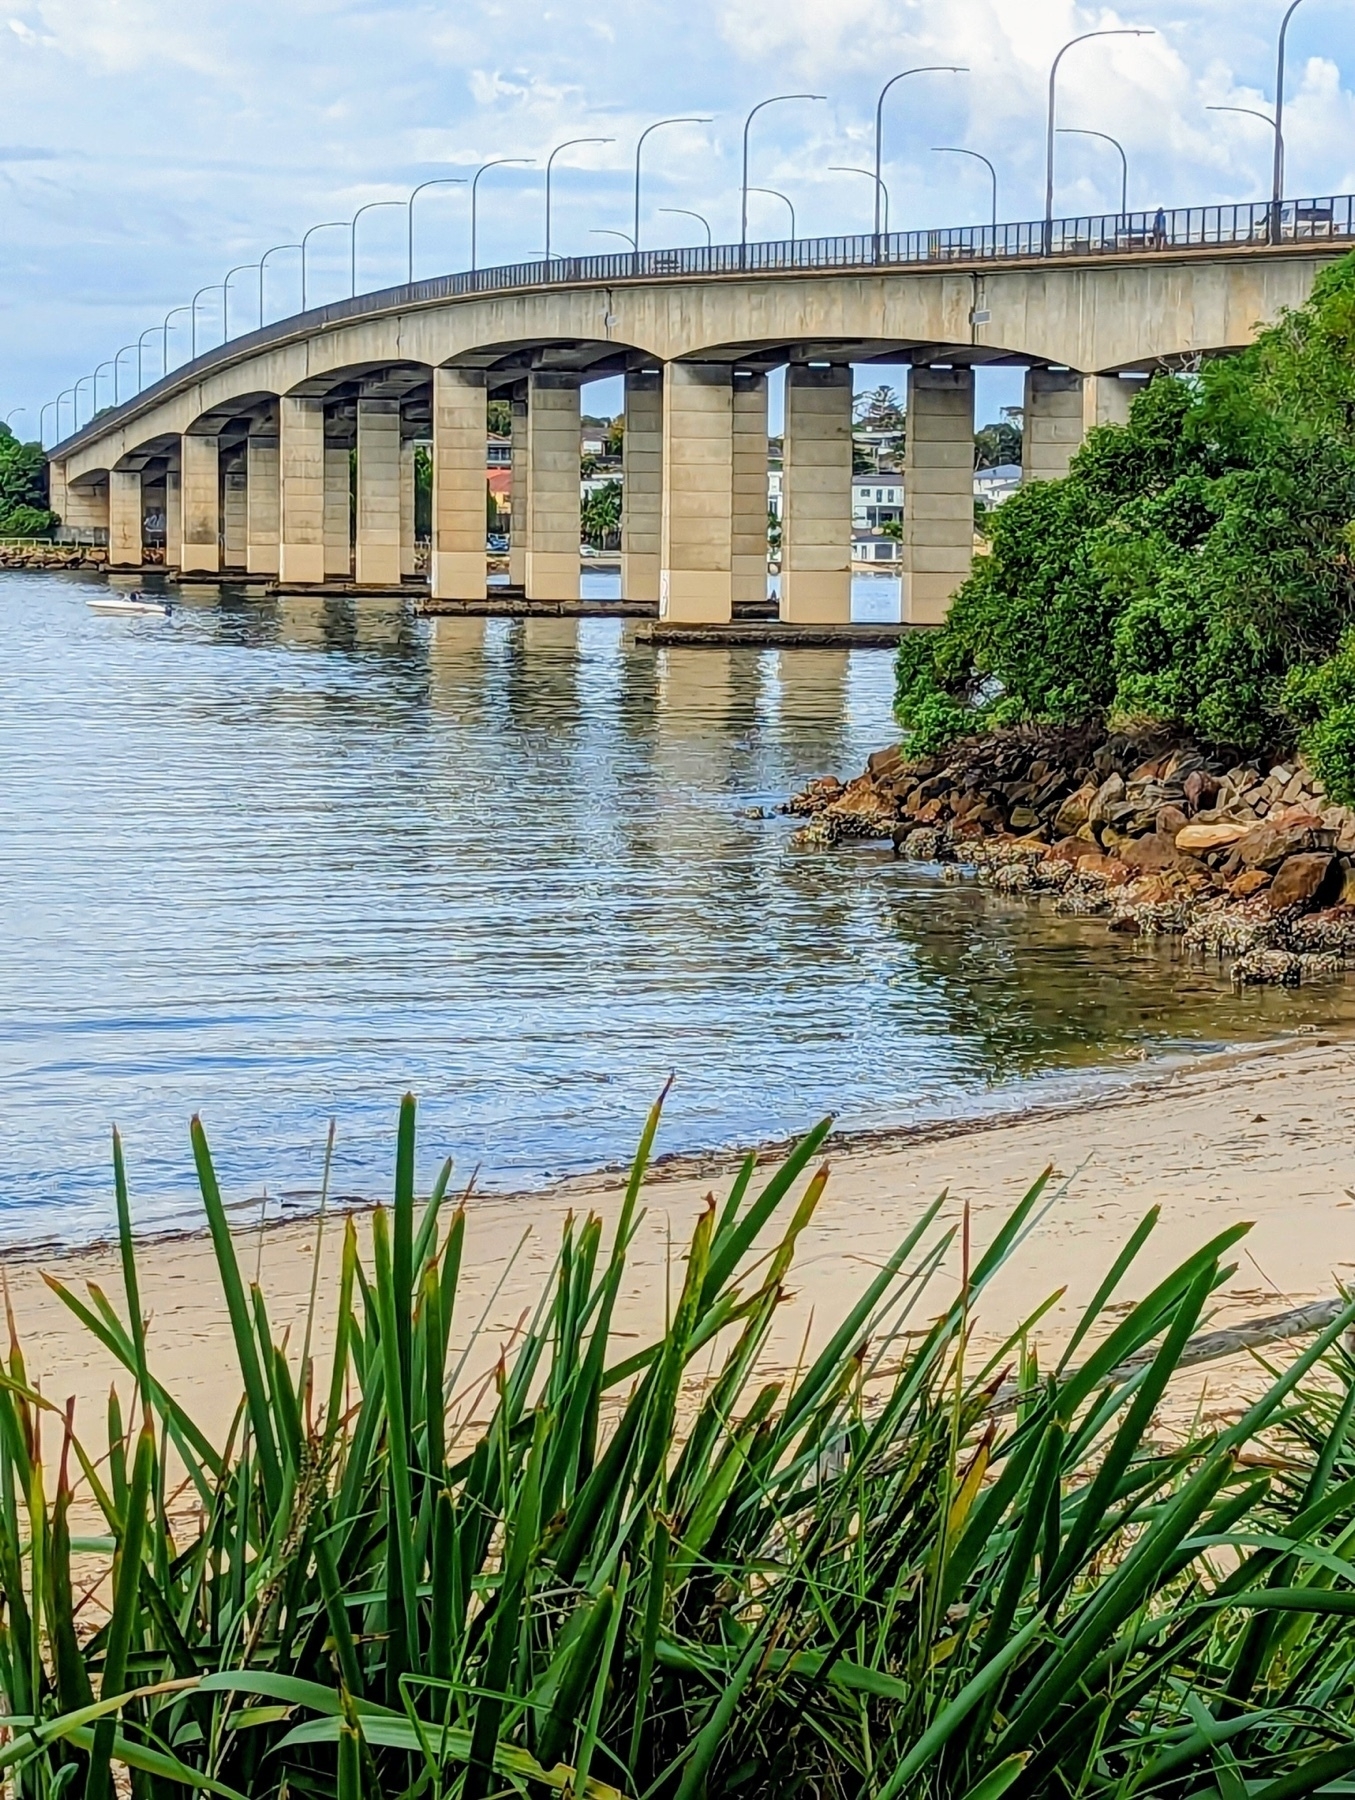 A view of the road bridge at the mouth of the Georges River in southern Sydney, showing many support pillars.